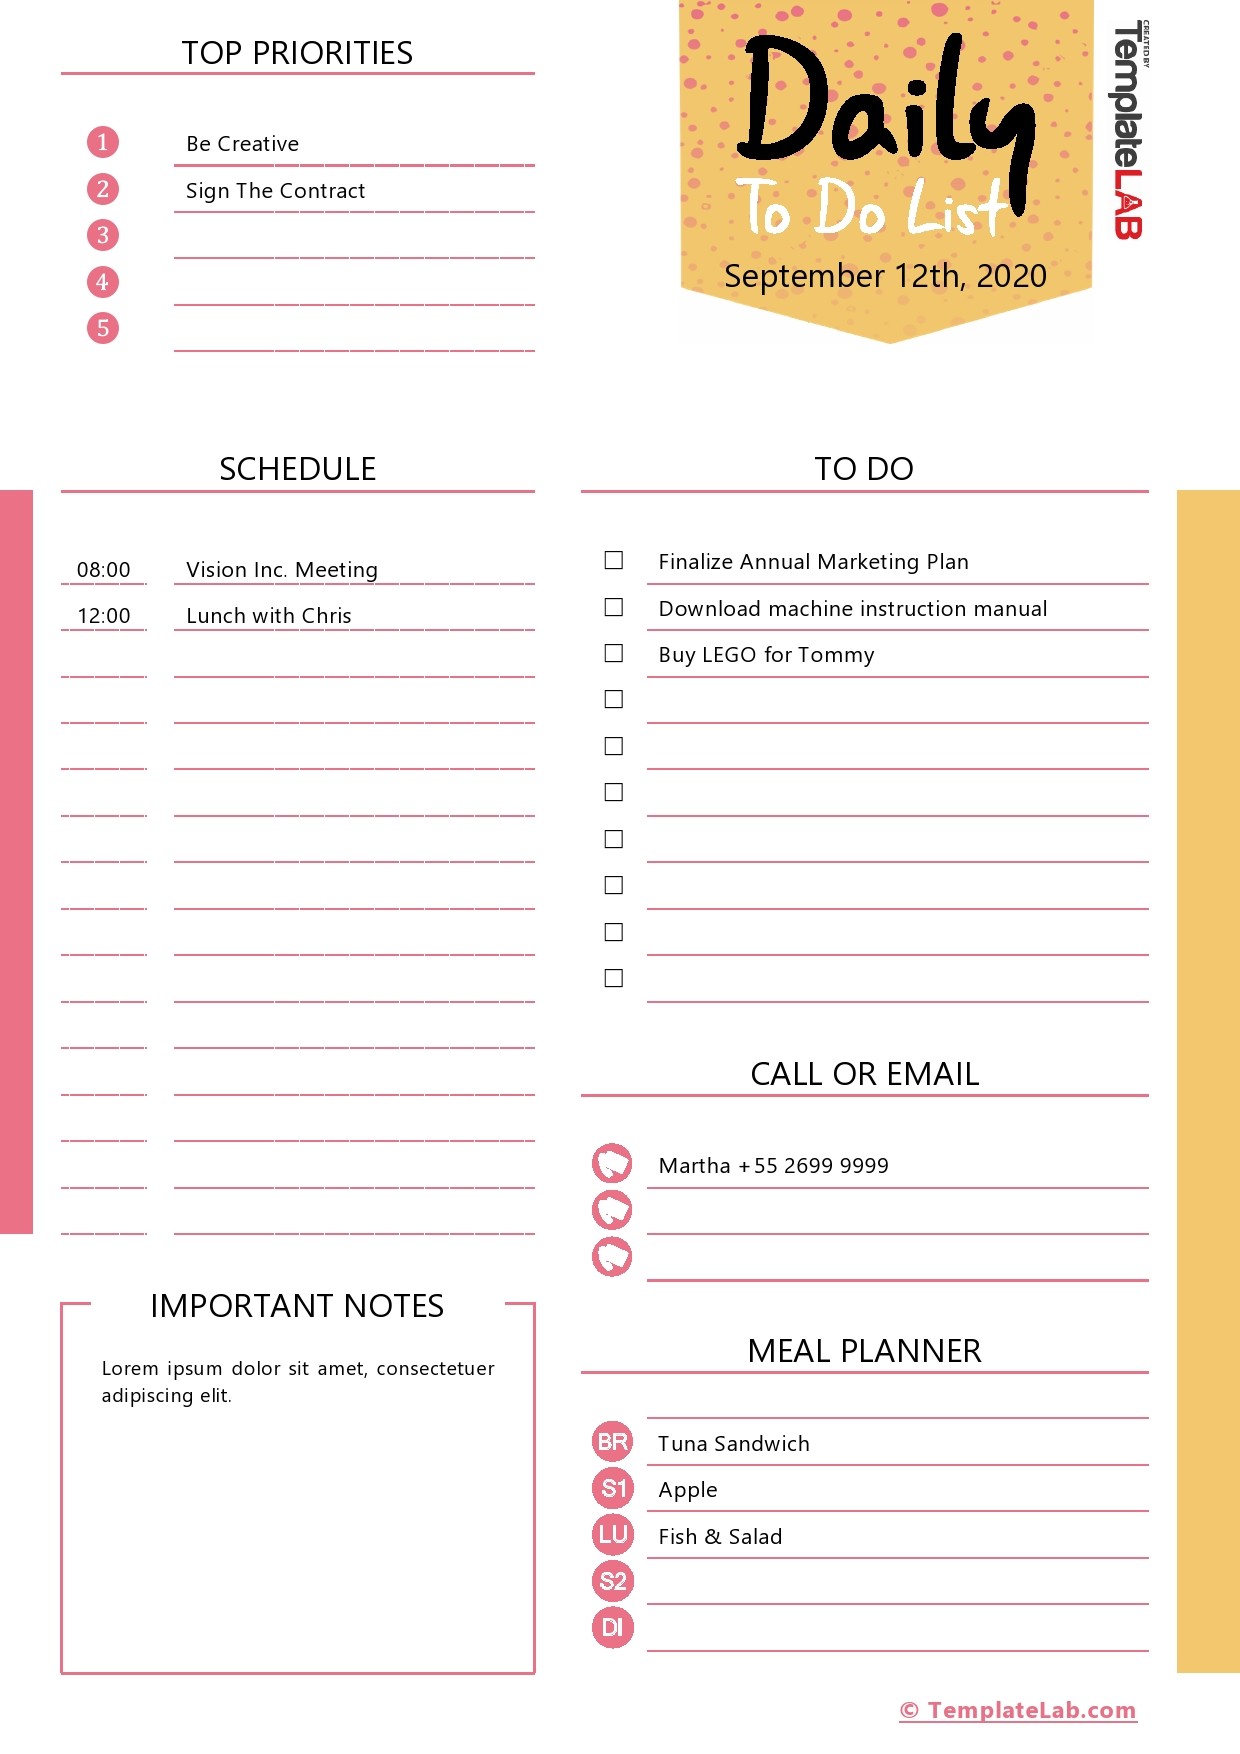 Daily To Do List Free Printable - Aulaiestpdm Blog